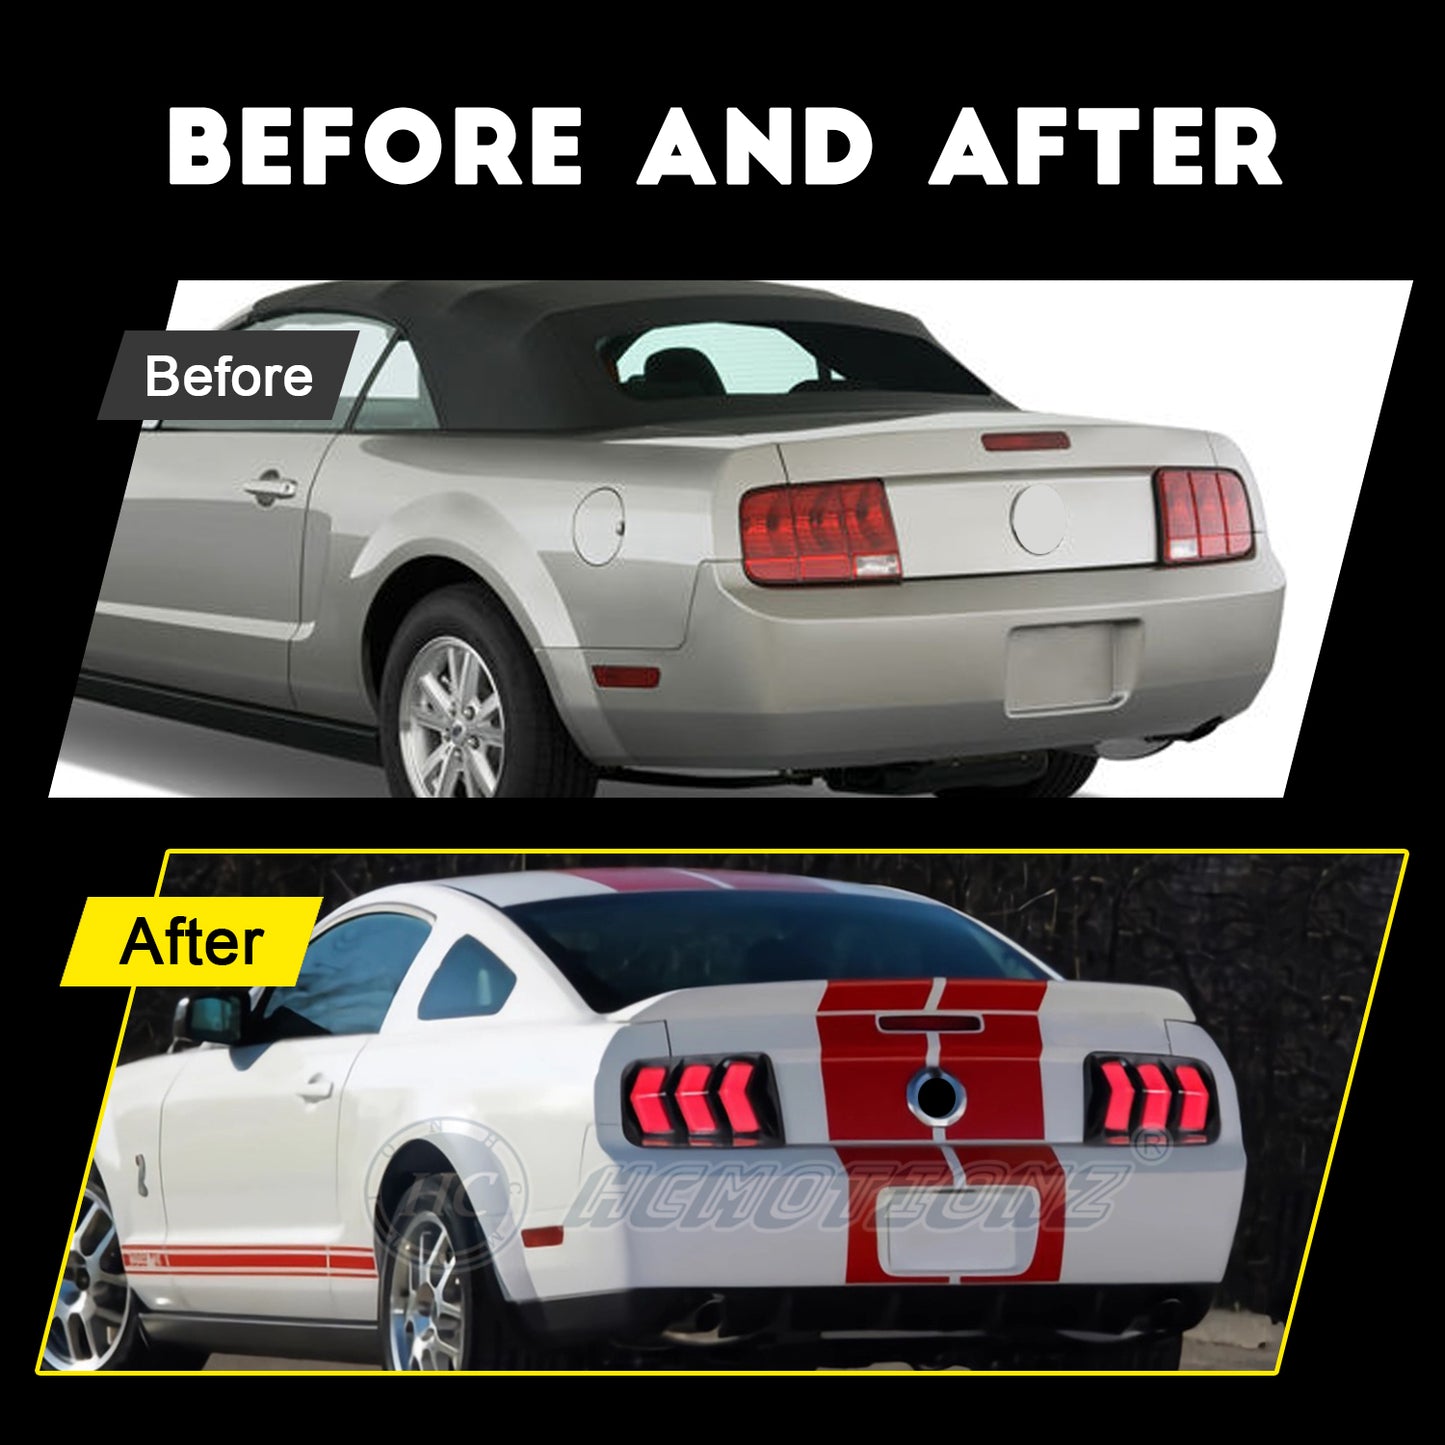 HCMOTIONZ FULL LED Tail lights For Ford Mustang 2005-2009 Start UP Animation